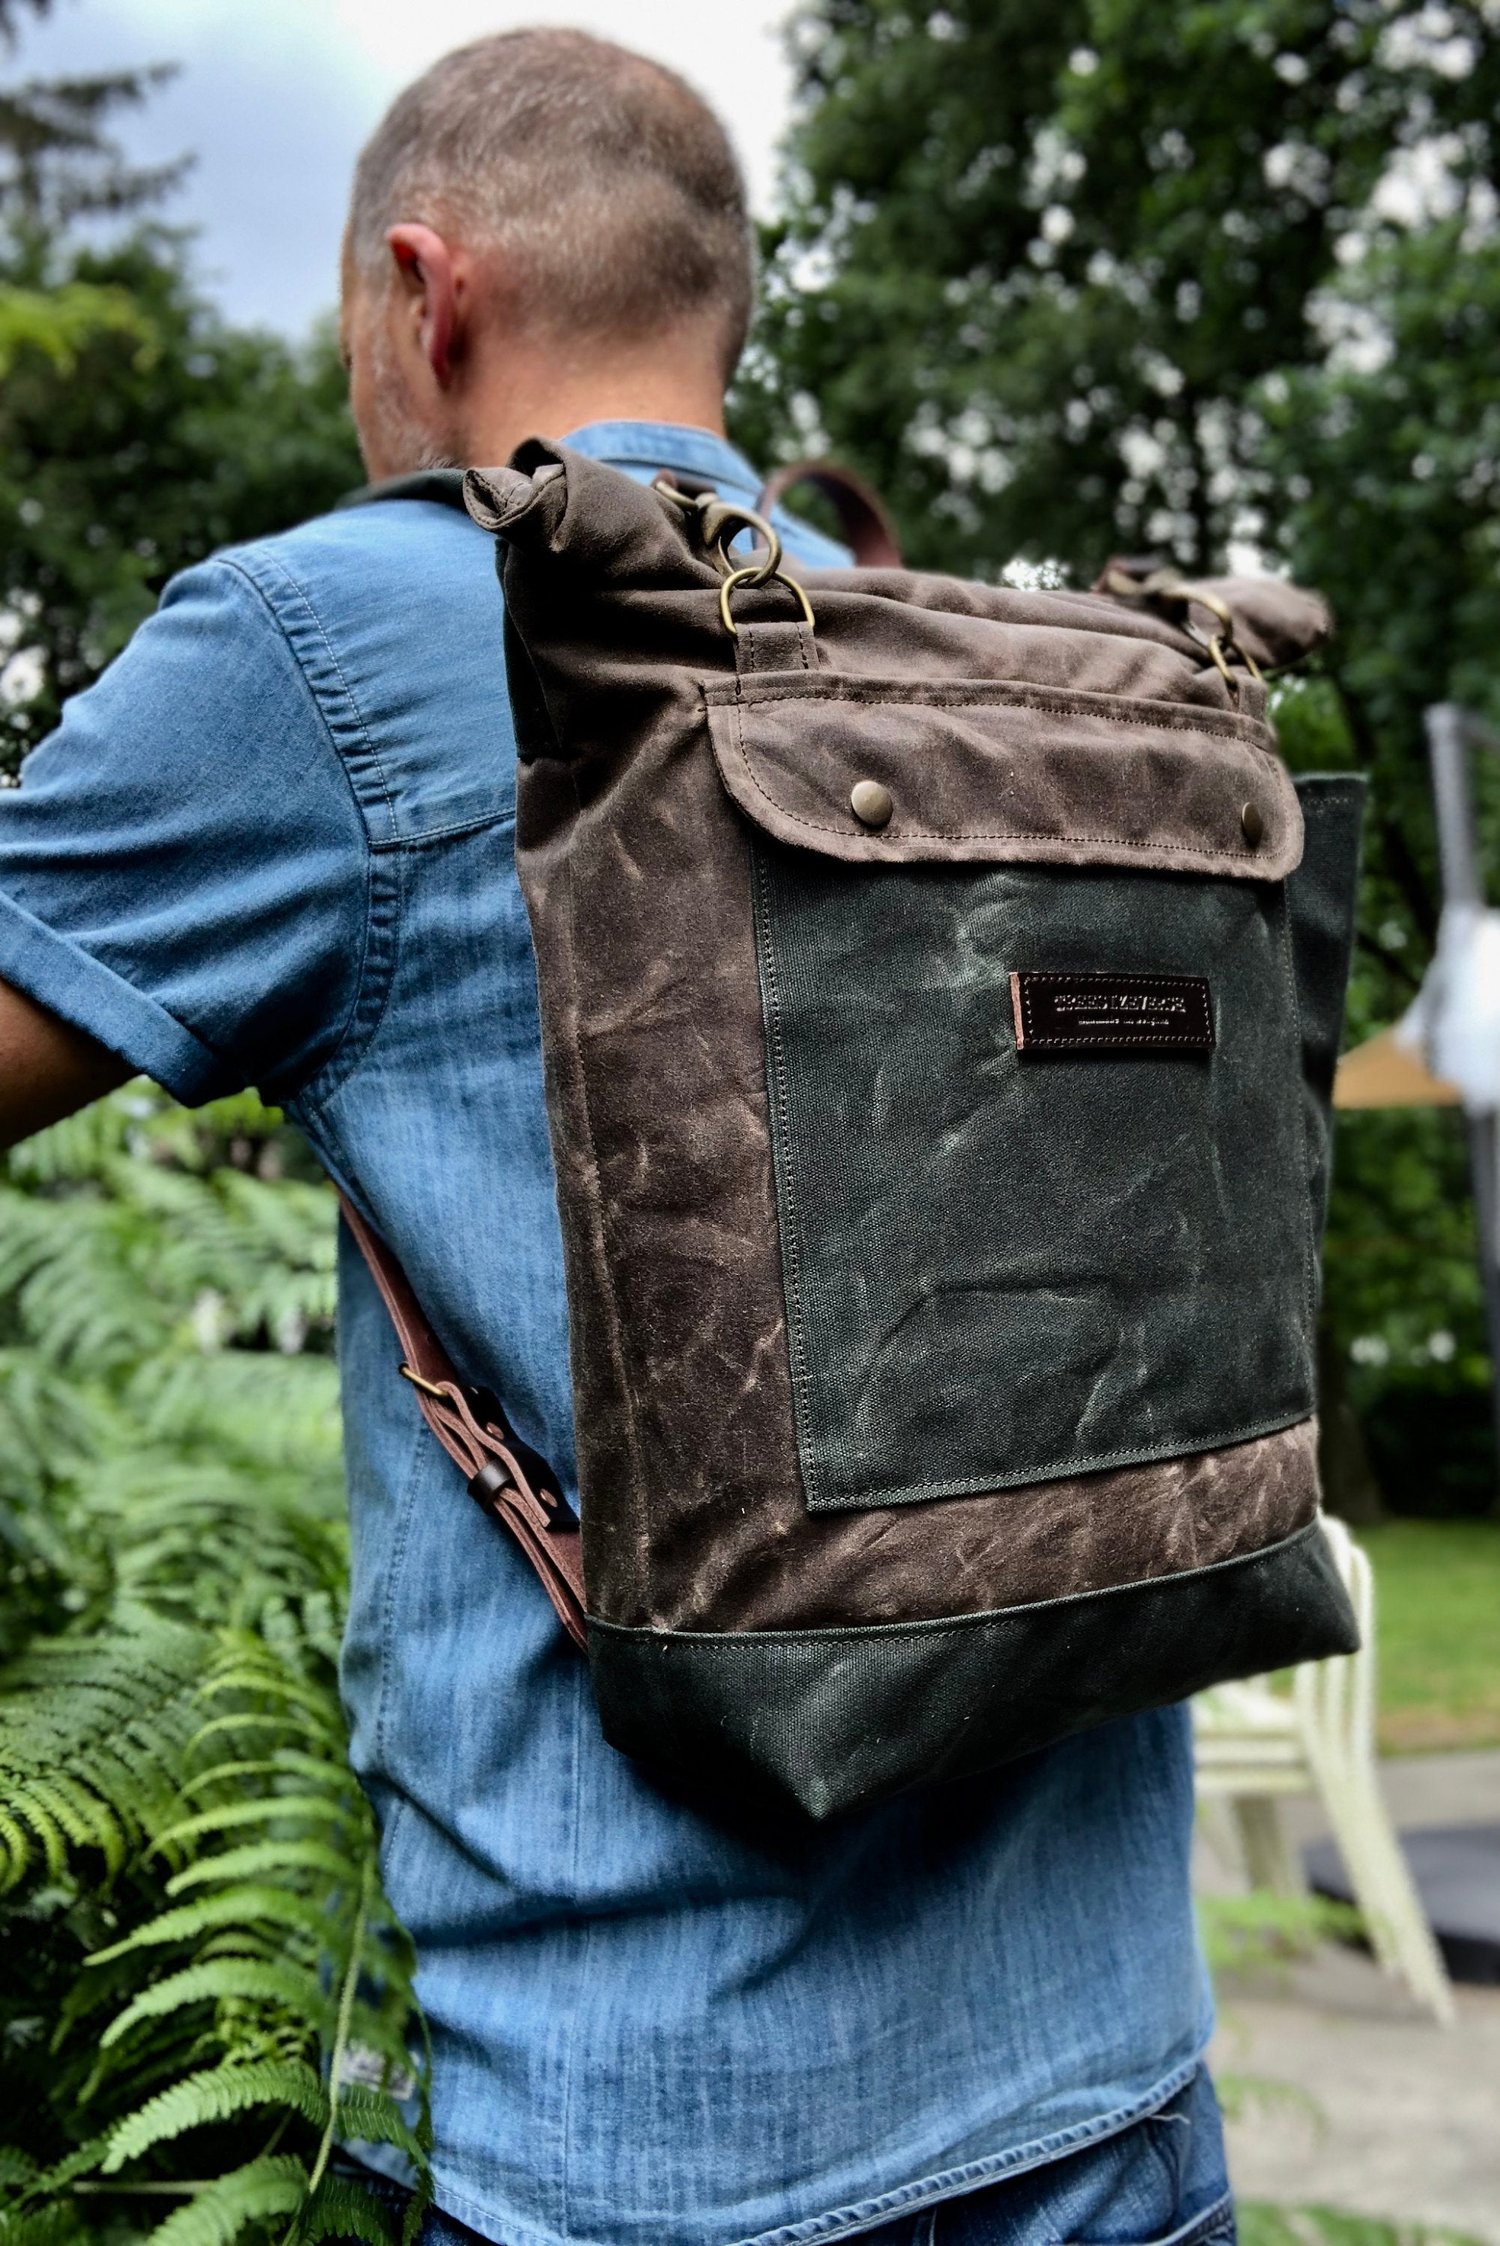 Image of College backpack in waxed canvas / waterproof rucksack with roll up top and double closure COLLECTIO